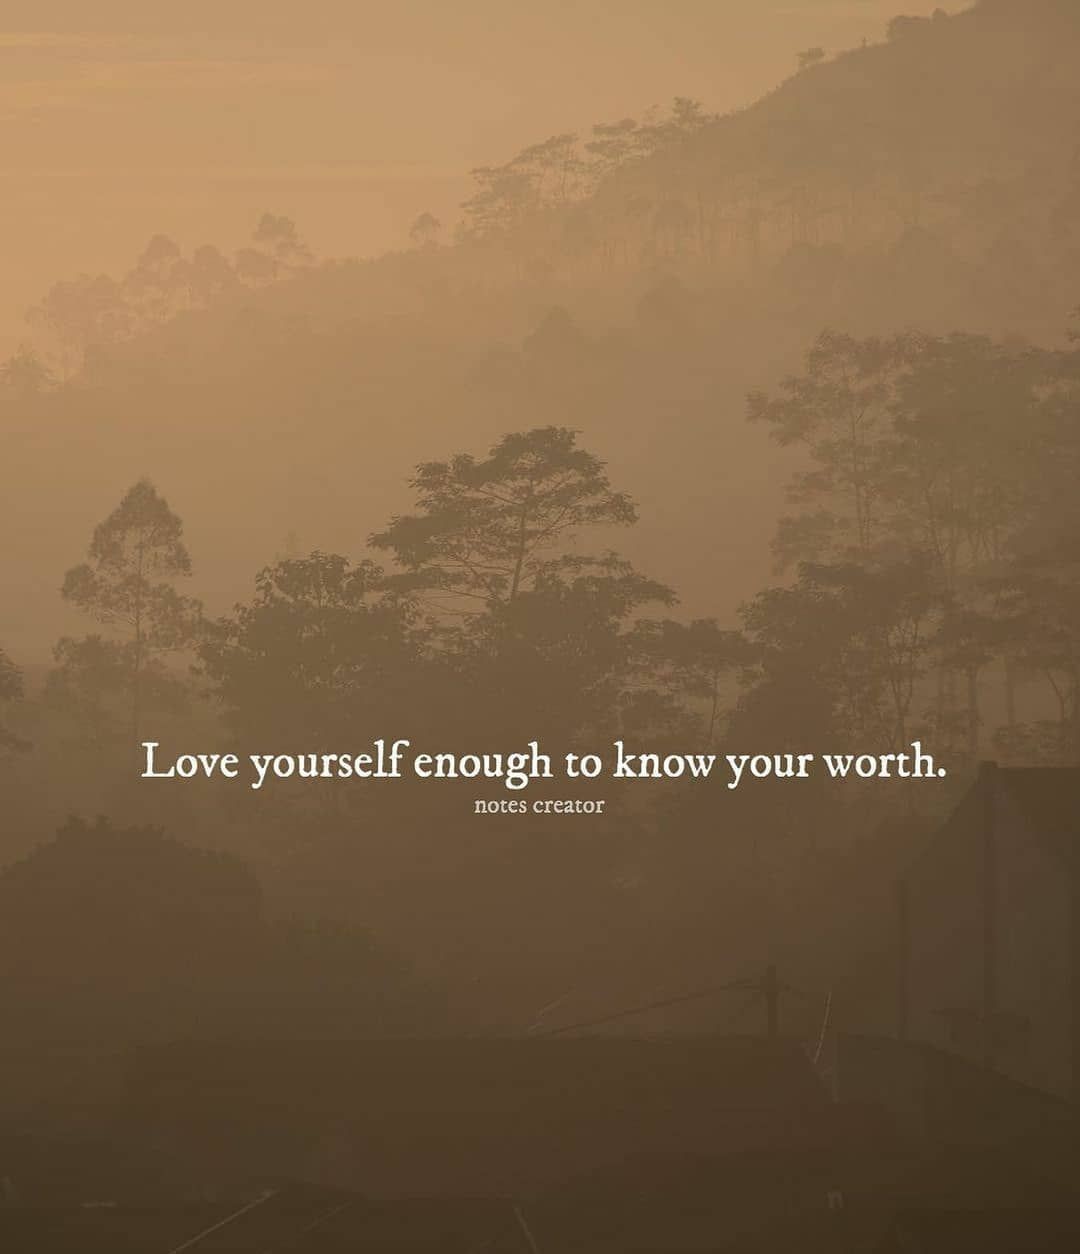 Love yourself enough to know your worth.